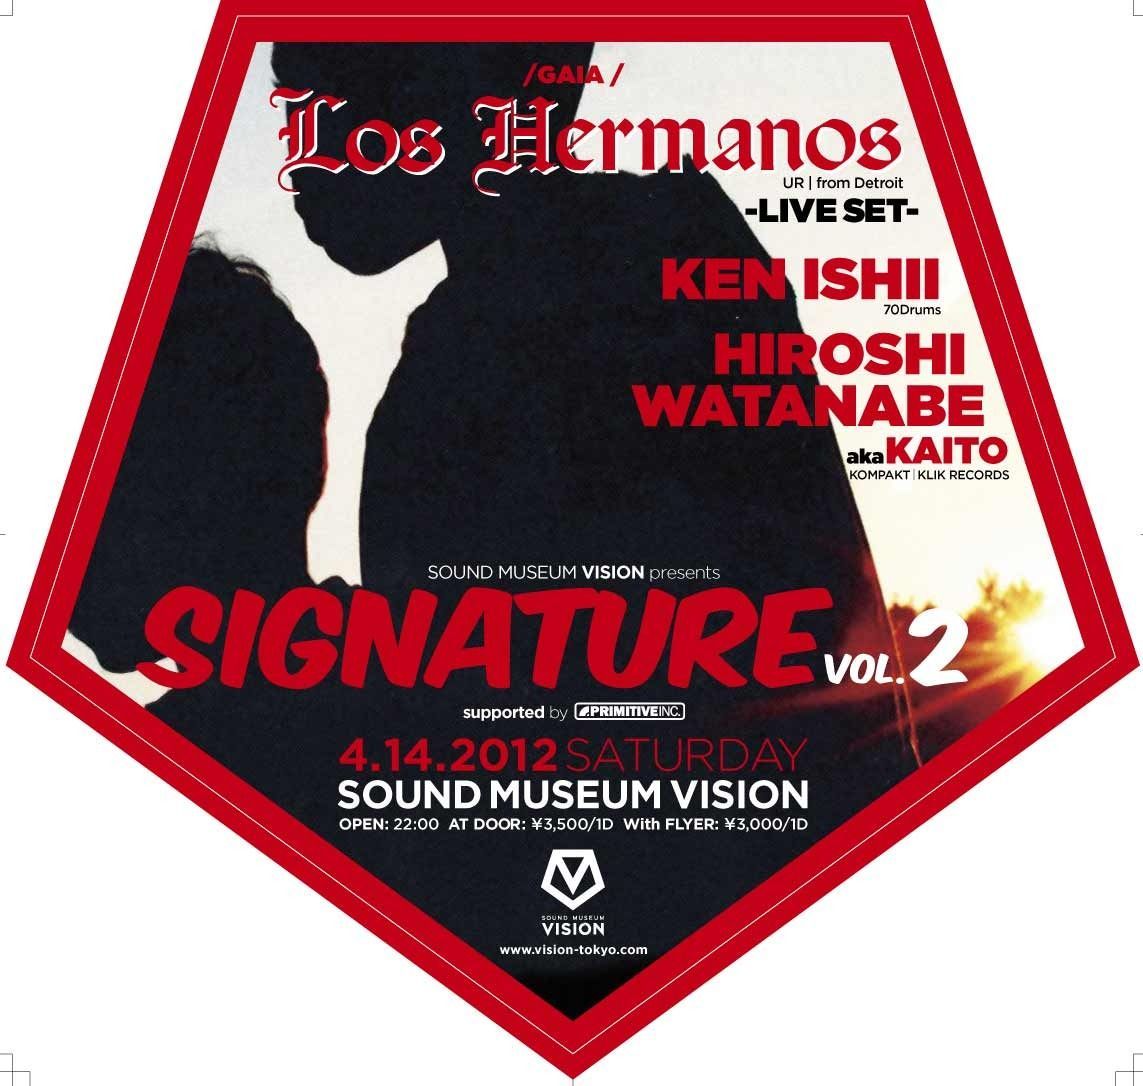 SOUND MUSEUM VISION presents SIGNATURE vol.2 supported by PRIMITIVE INC. 